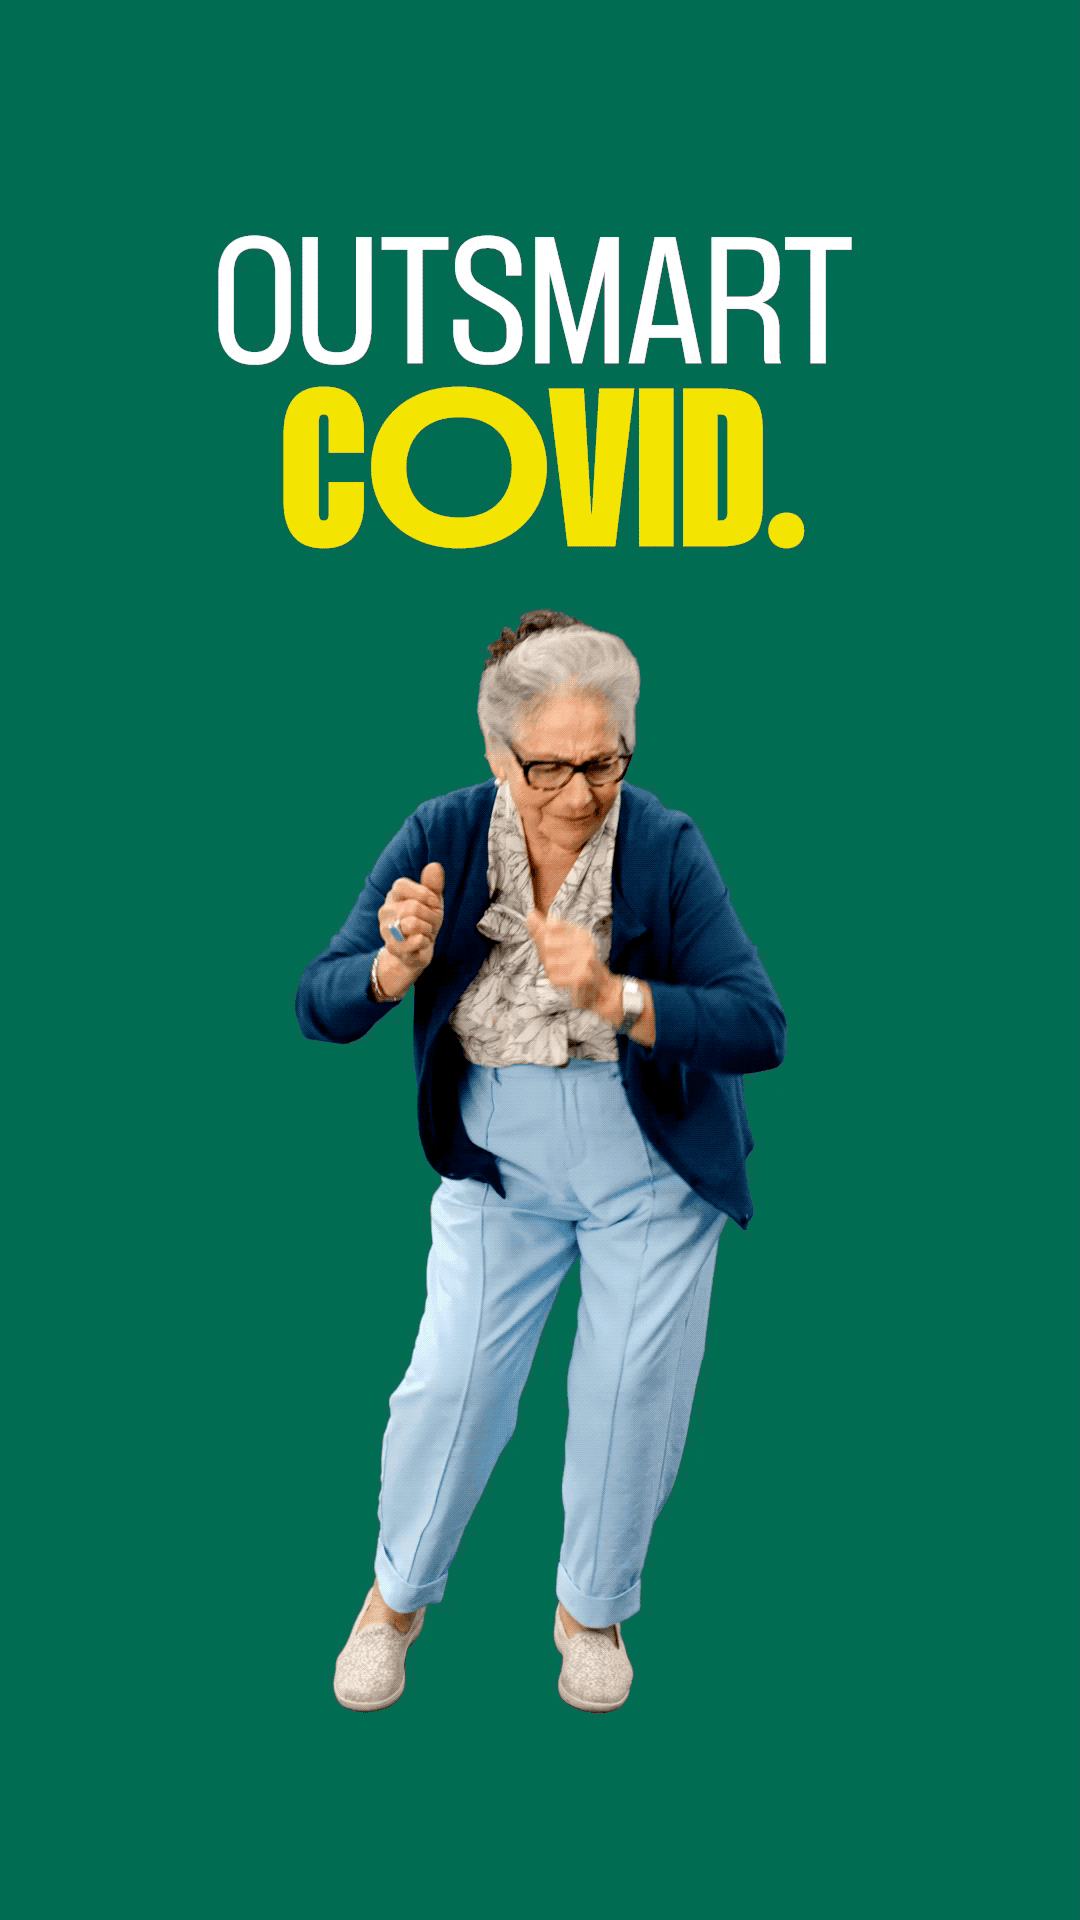 GIF on forest green background showing an older woman / grandma wearing light blue slacks, a dark blue cardigan with a patterned, light blouse with large bow-tie doing a celebratory dance. Copy in white above her reads, “Outsmart COVID.” (“COVID” in yellow type) then flashes to, “Now there’s medication to treat COVID-19.” in smaller white type. 